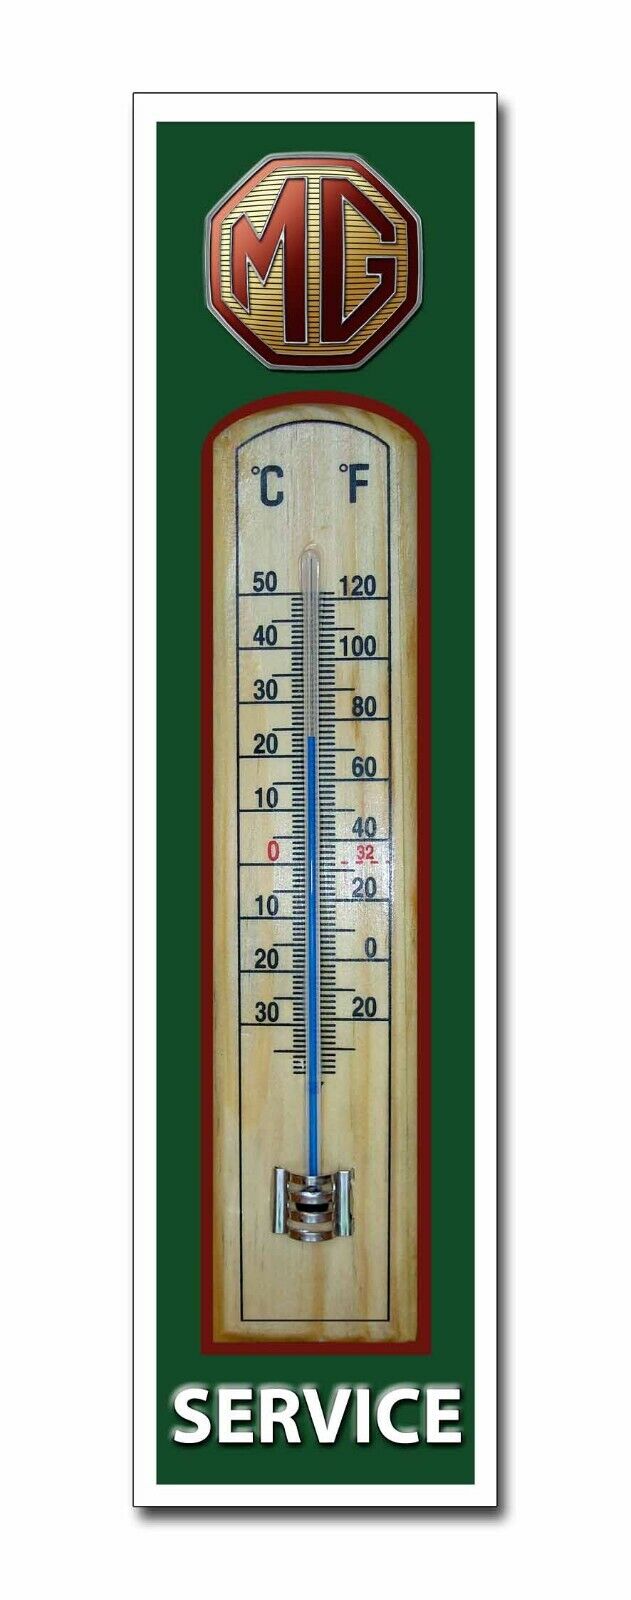 MG SERVICE METAL AND WOOD THERMOMETER.CLASSIC BRITISH MG CARS.GARAGE THERMOMETER